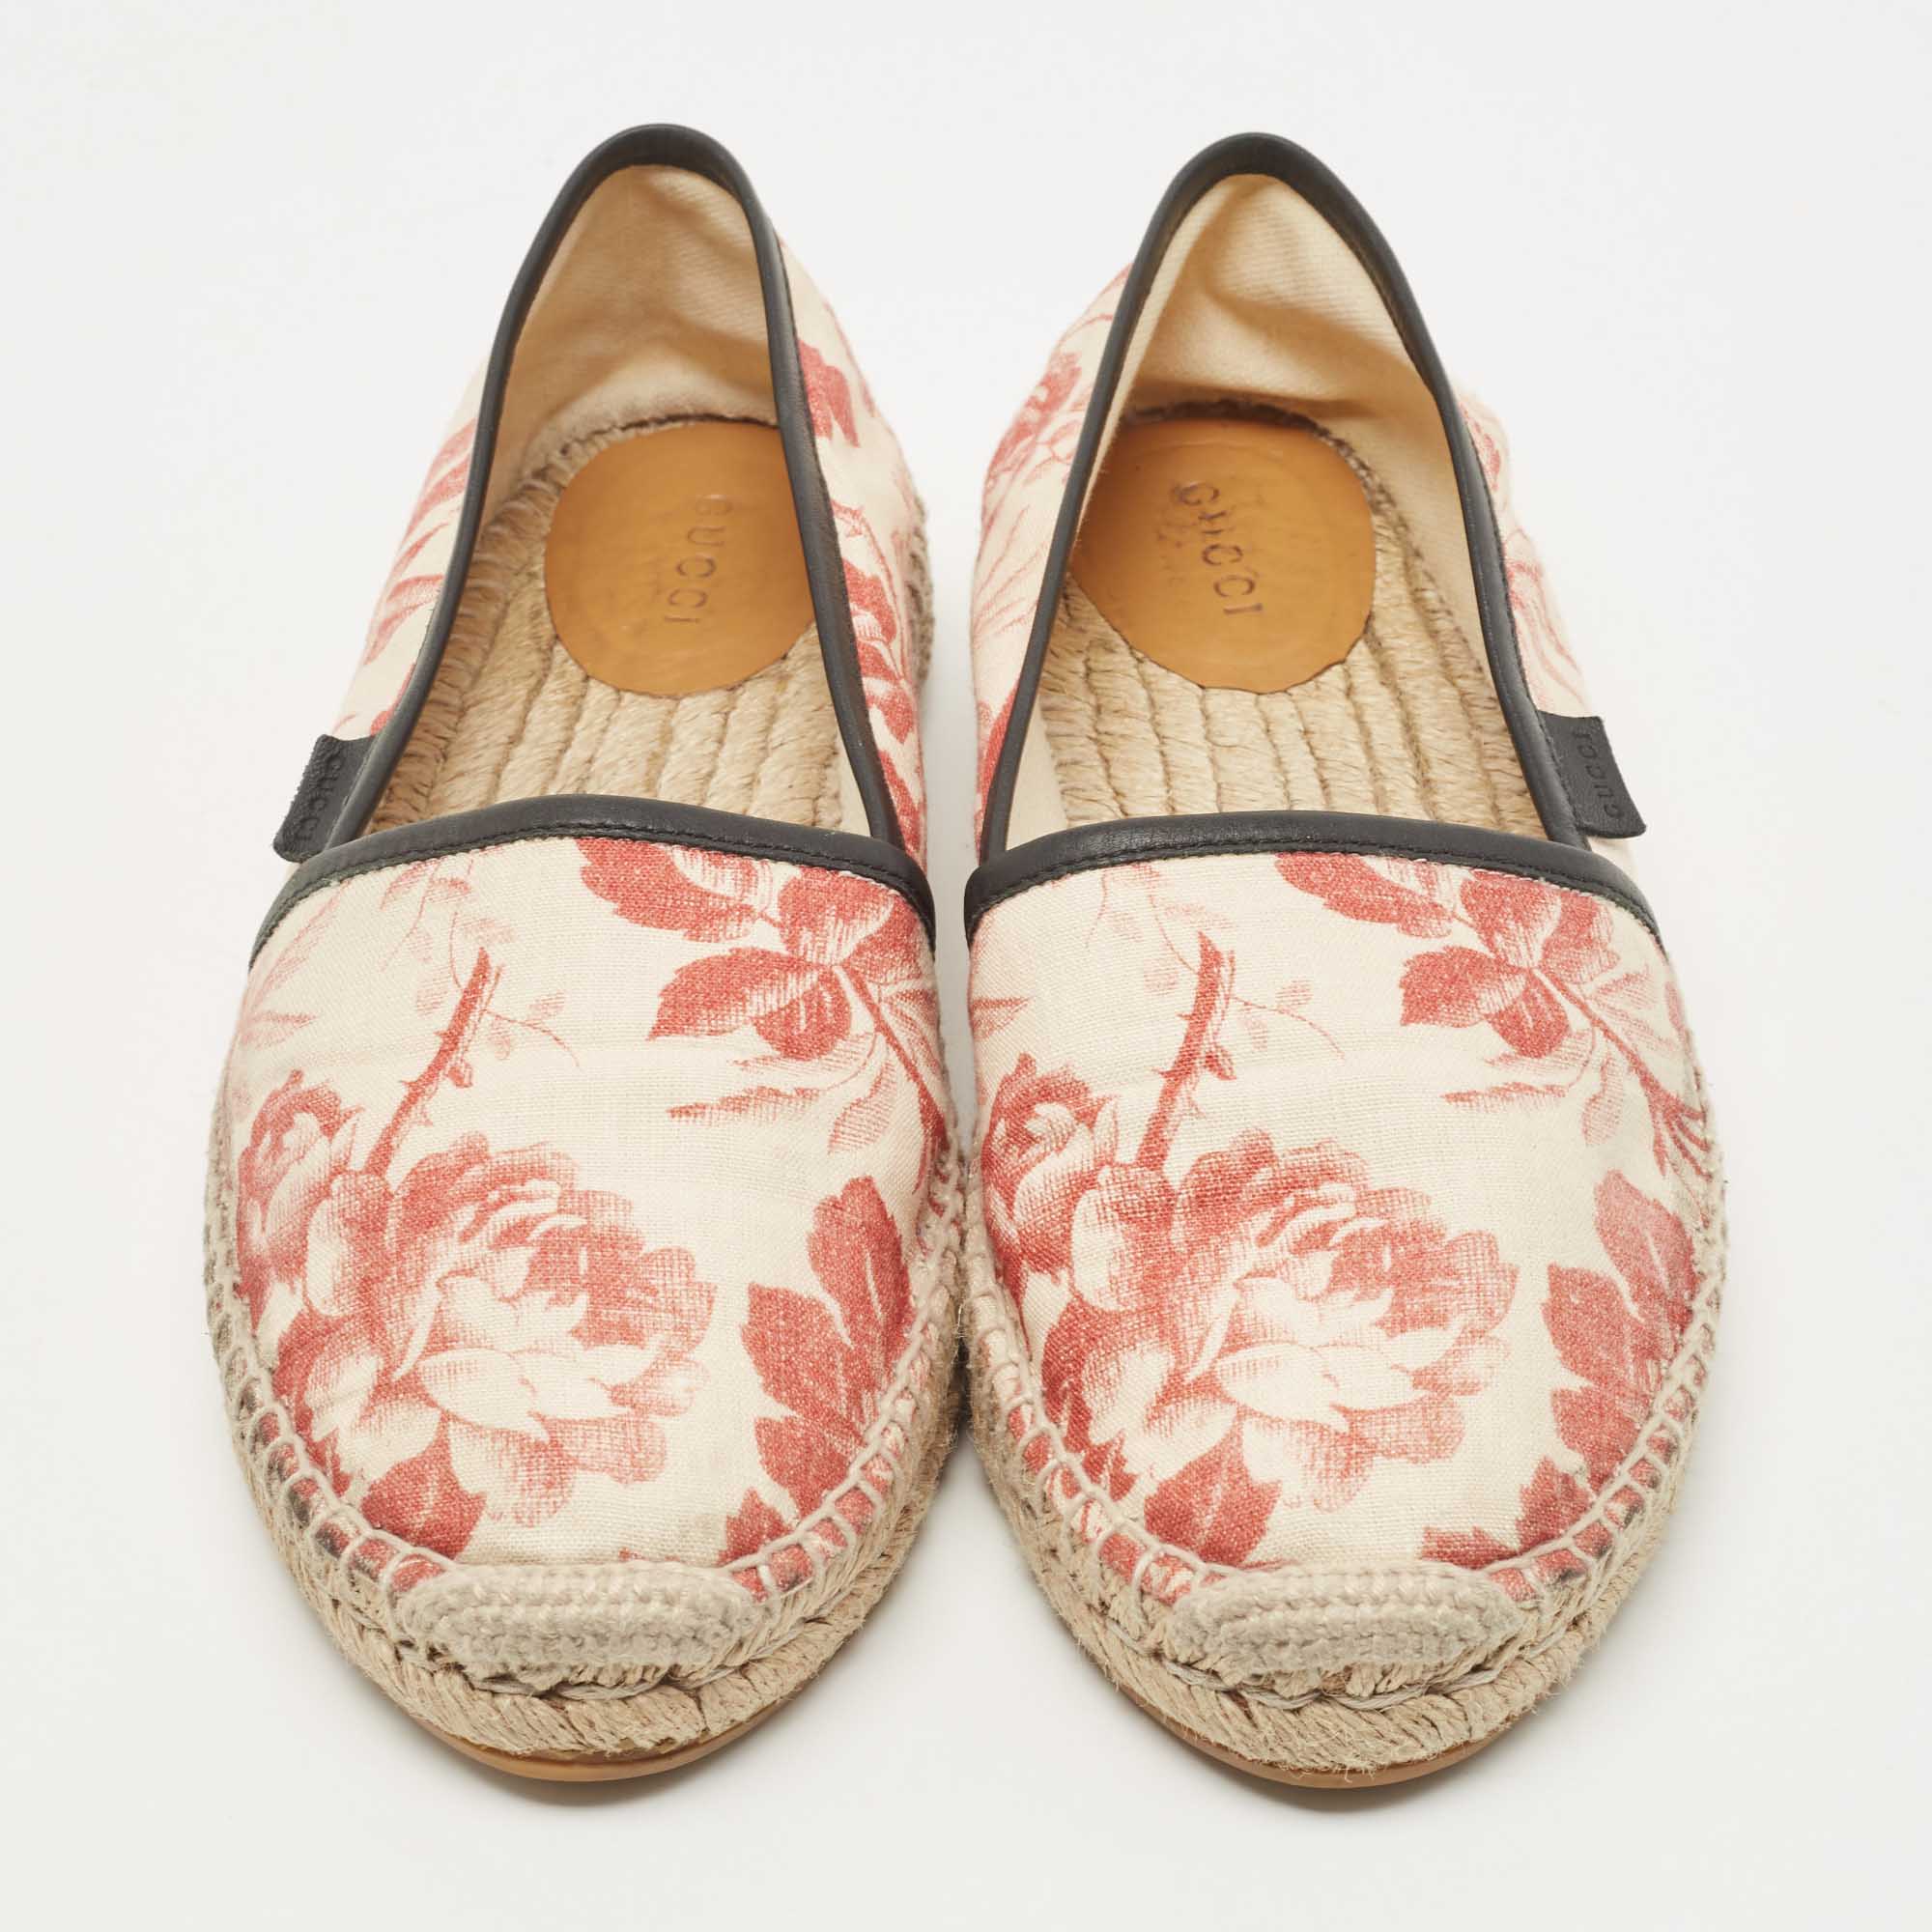 Gucci Beige Floral Printed Fabric Slip On Espradrille Flats Size 38.5